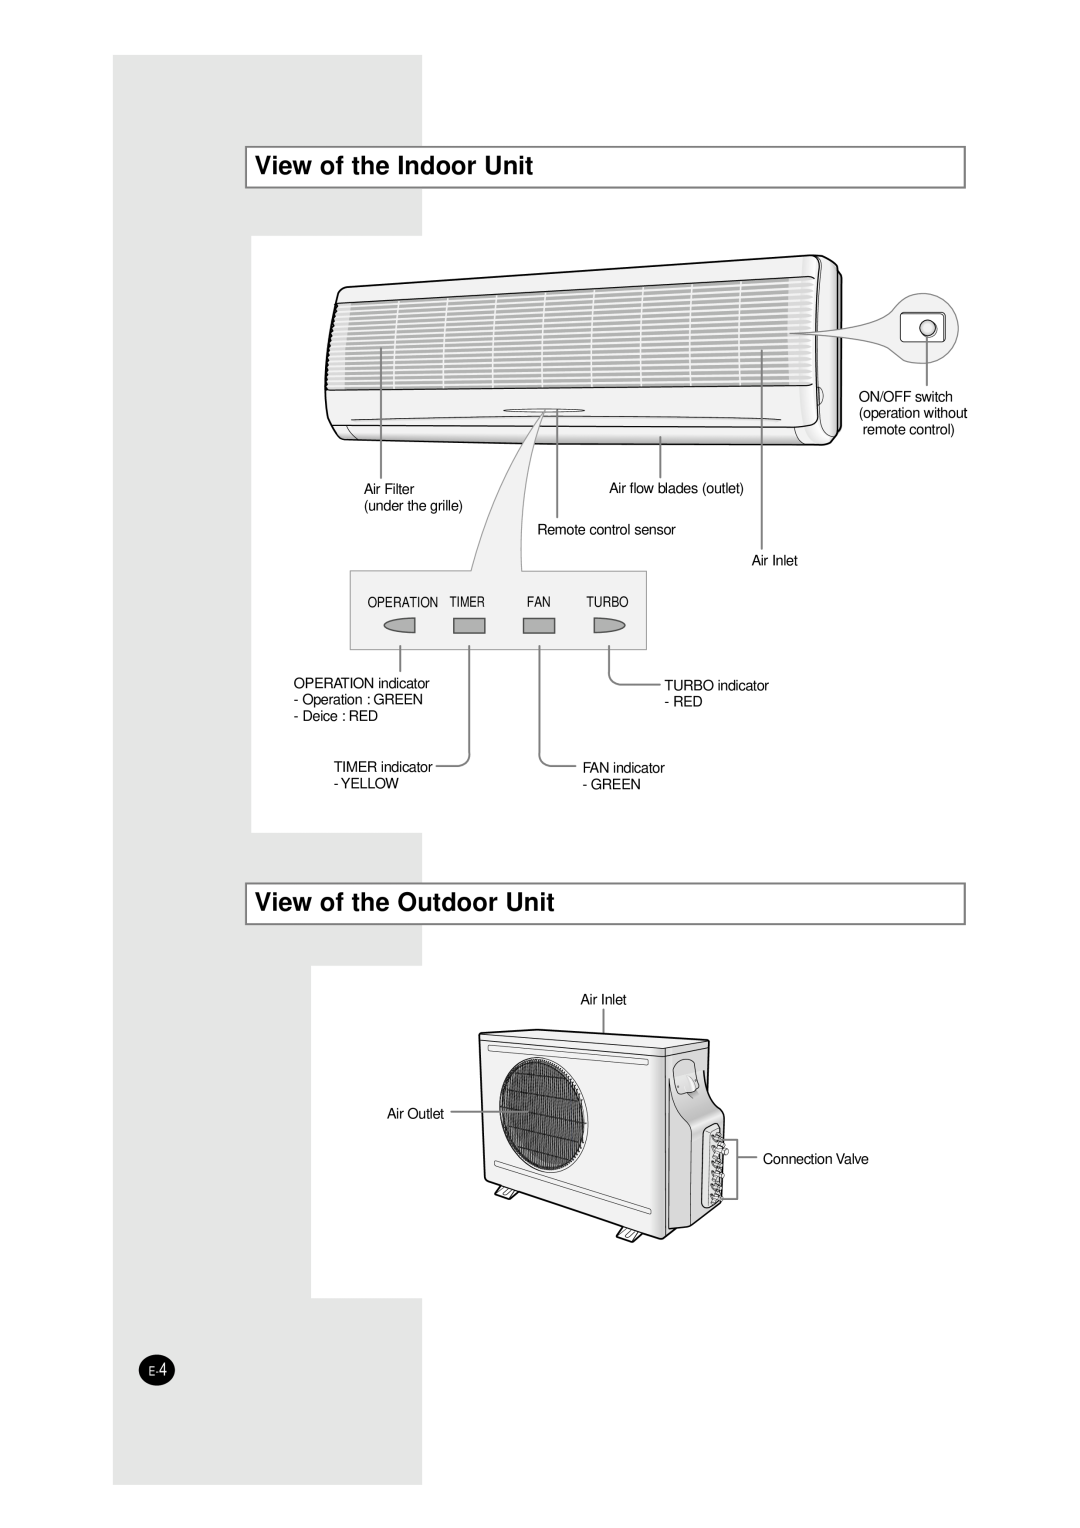 Samsung MH07ZV-26 View of the Indoor Unit, View of the Outdoor Unit, Air Filter, Air flow blades outlet, under the grille 